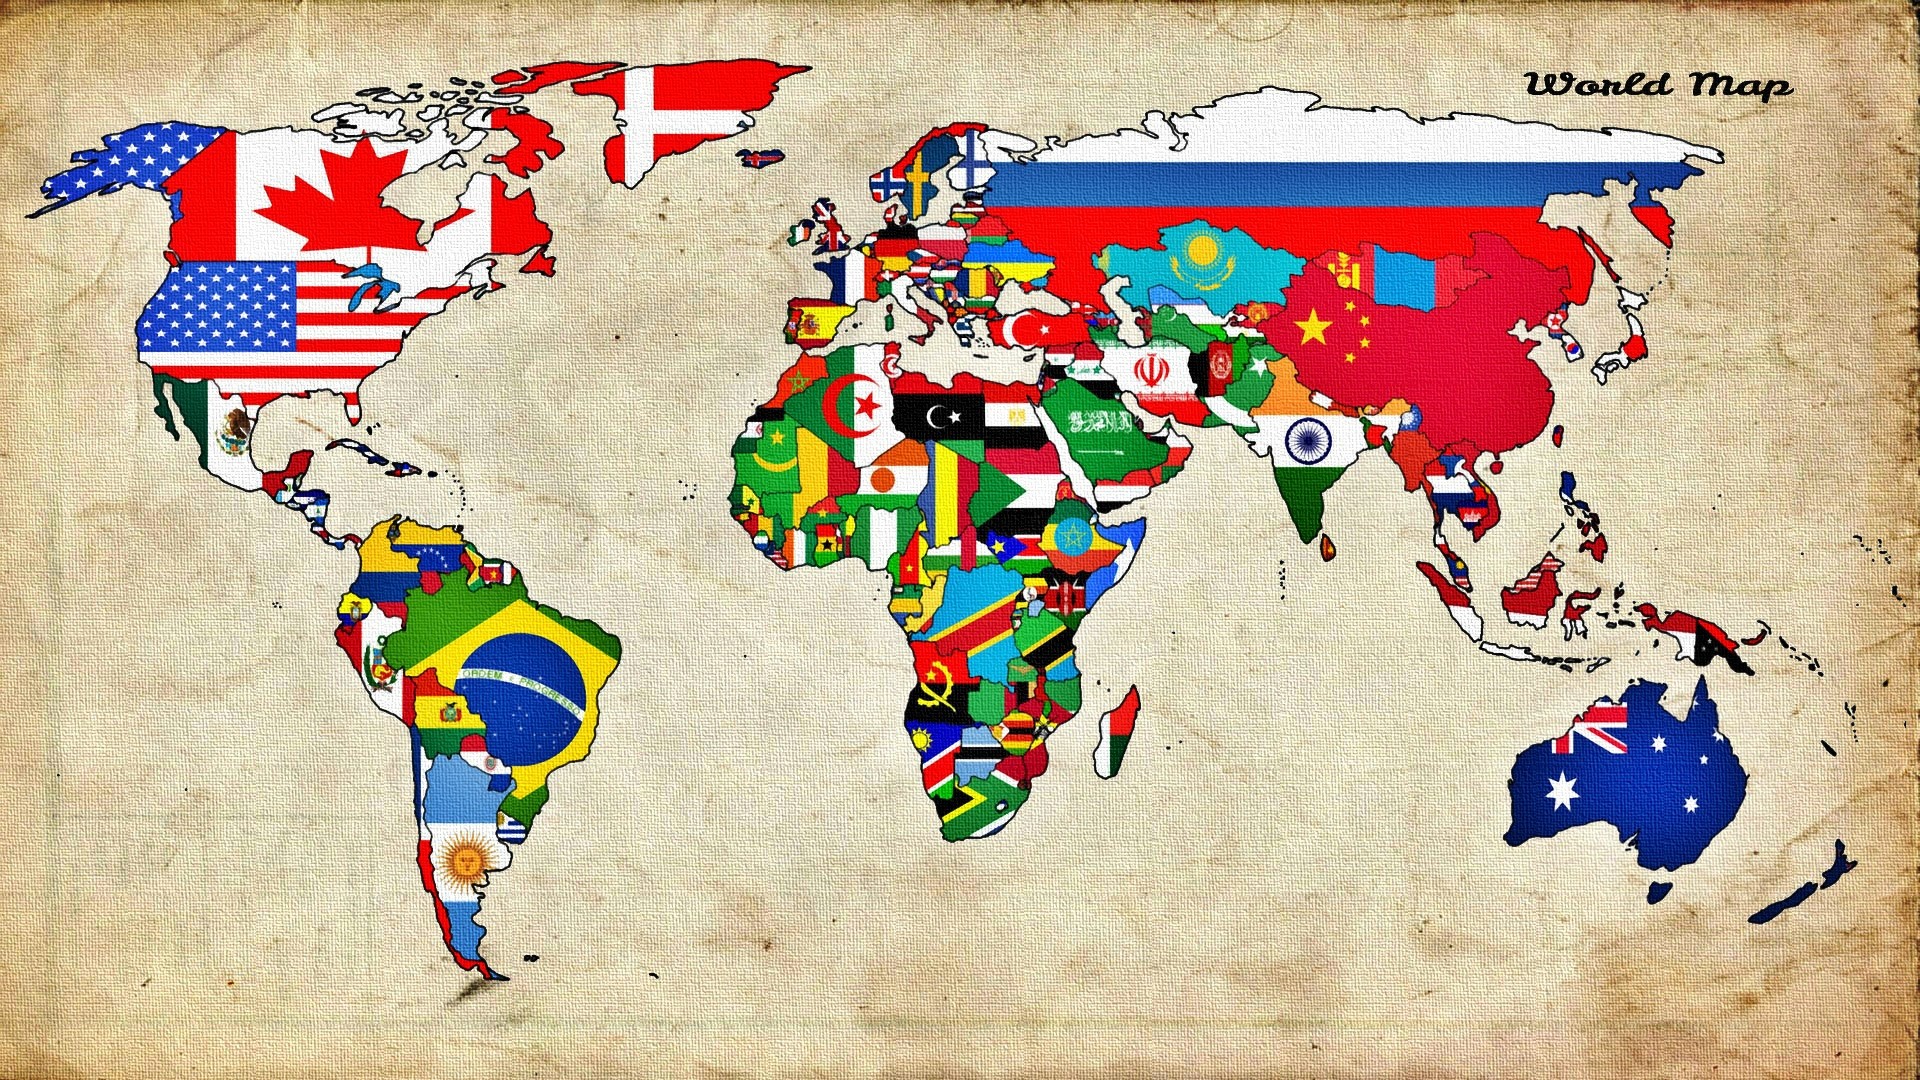 General 1920x1080 world map map artwork colorful wrong borders